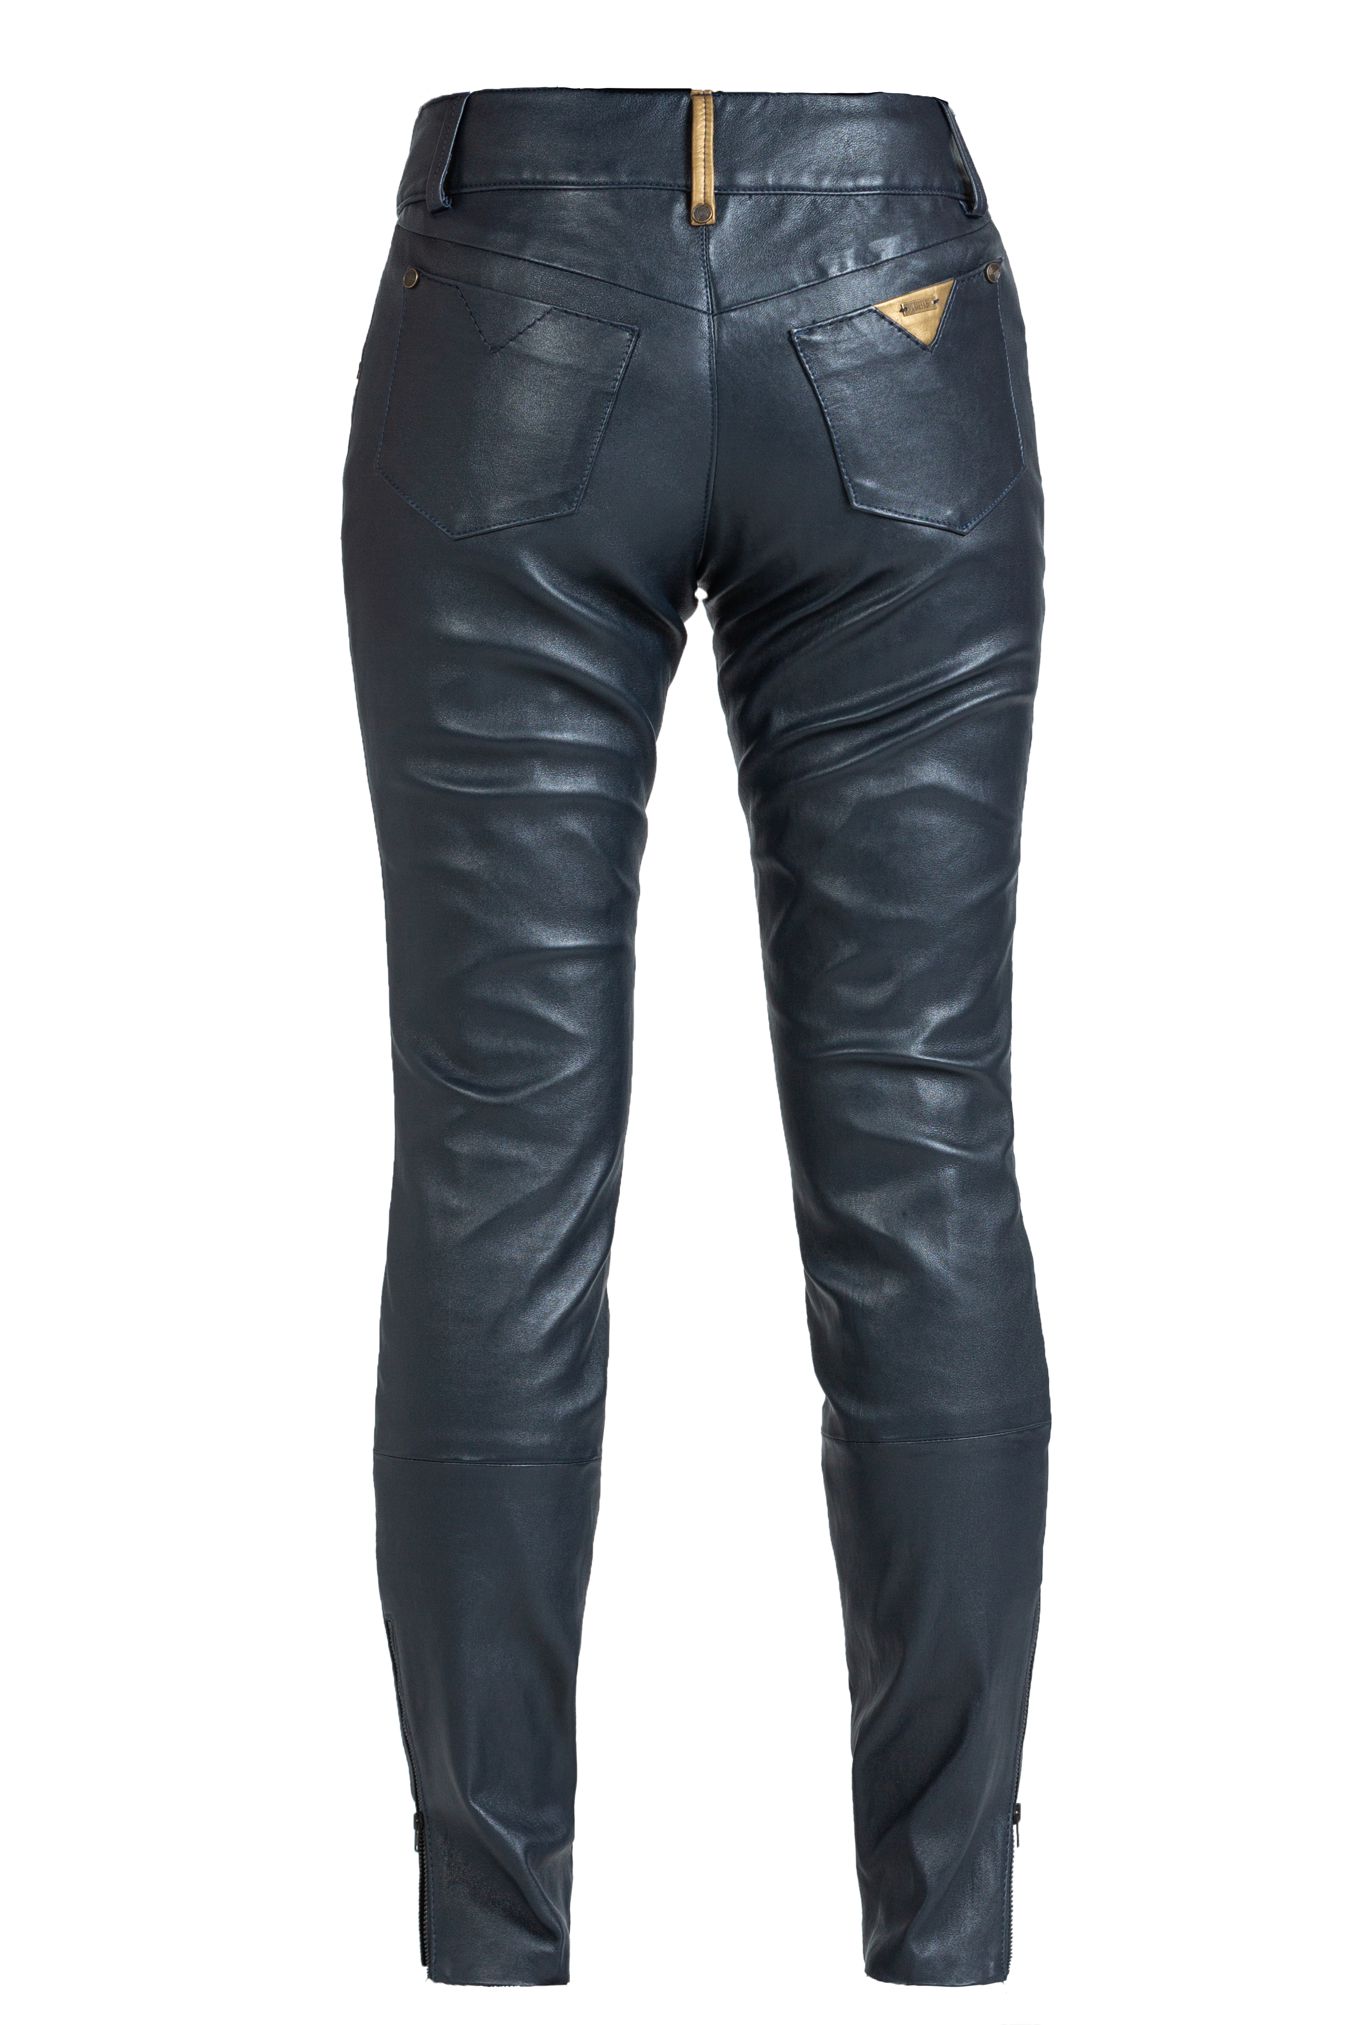 120008 LEATHER PANTS NAVY BLUE - By Rieske image 4